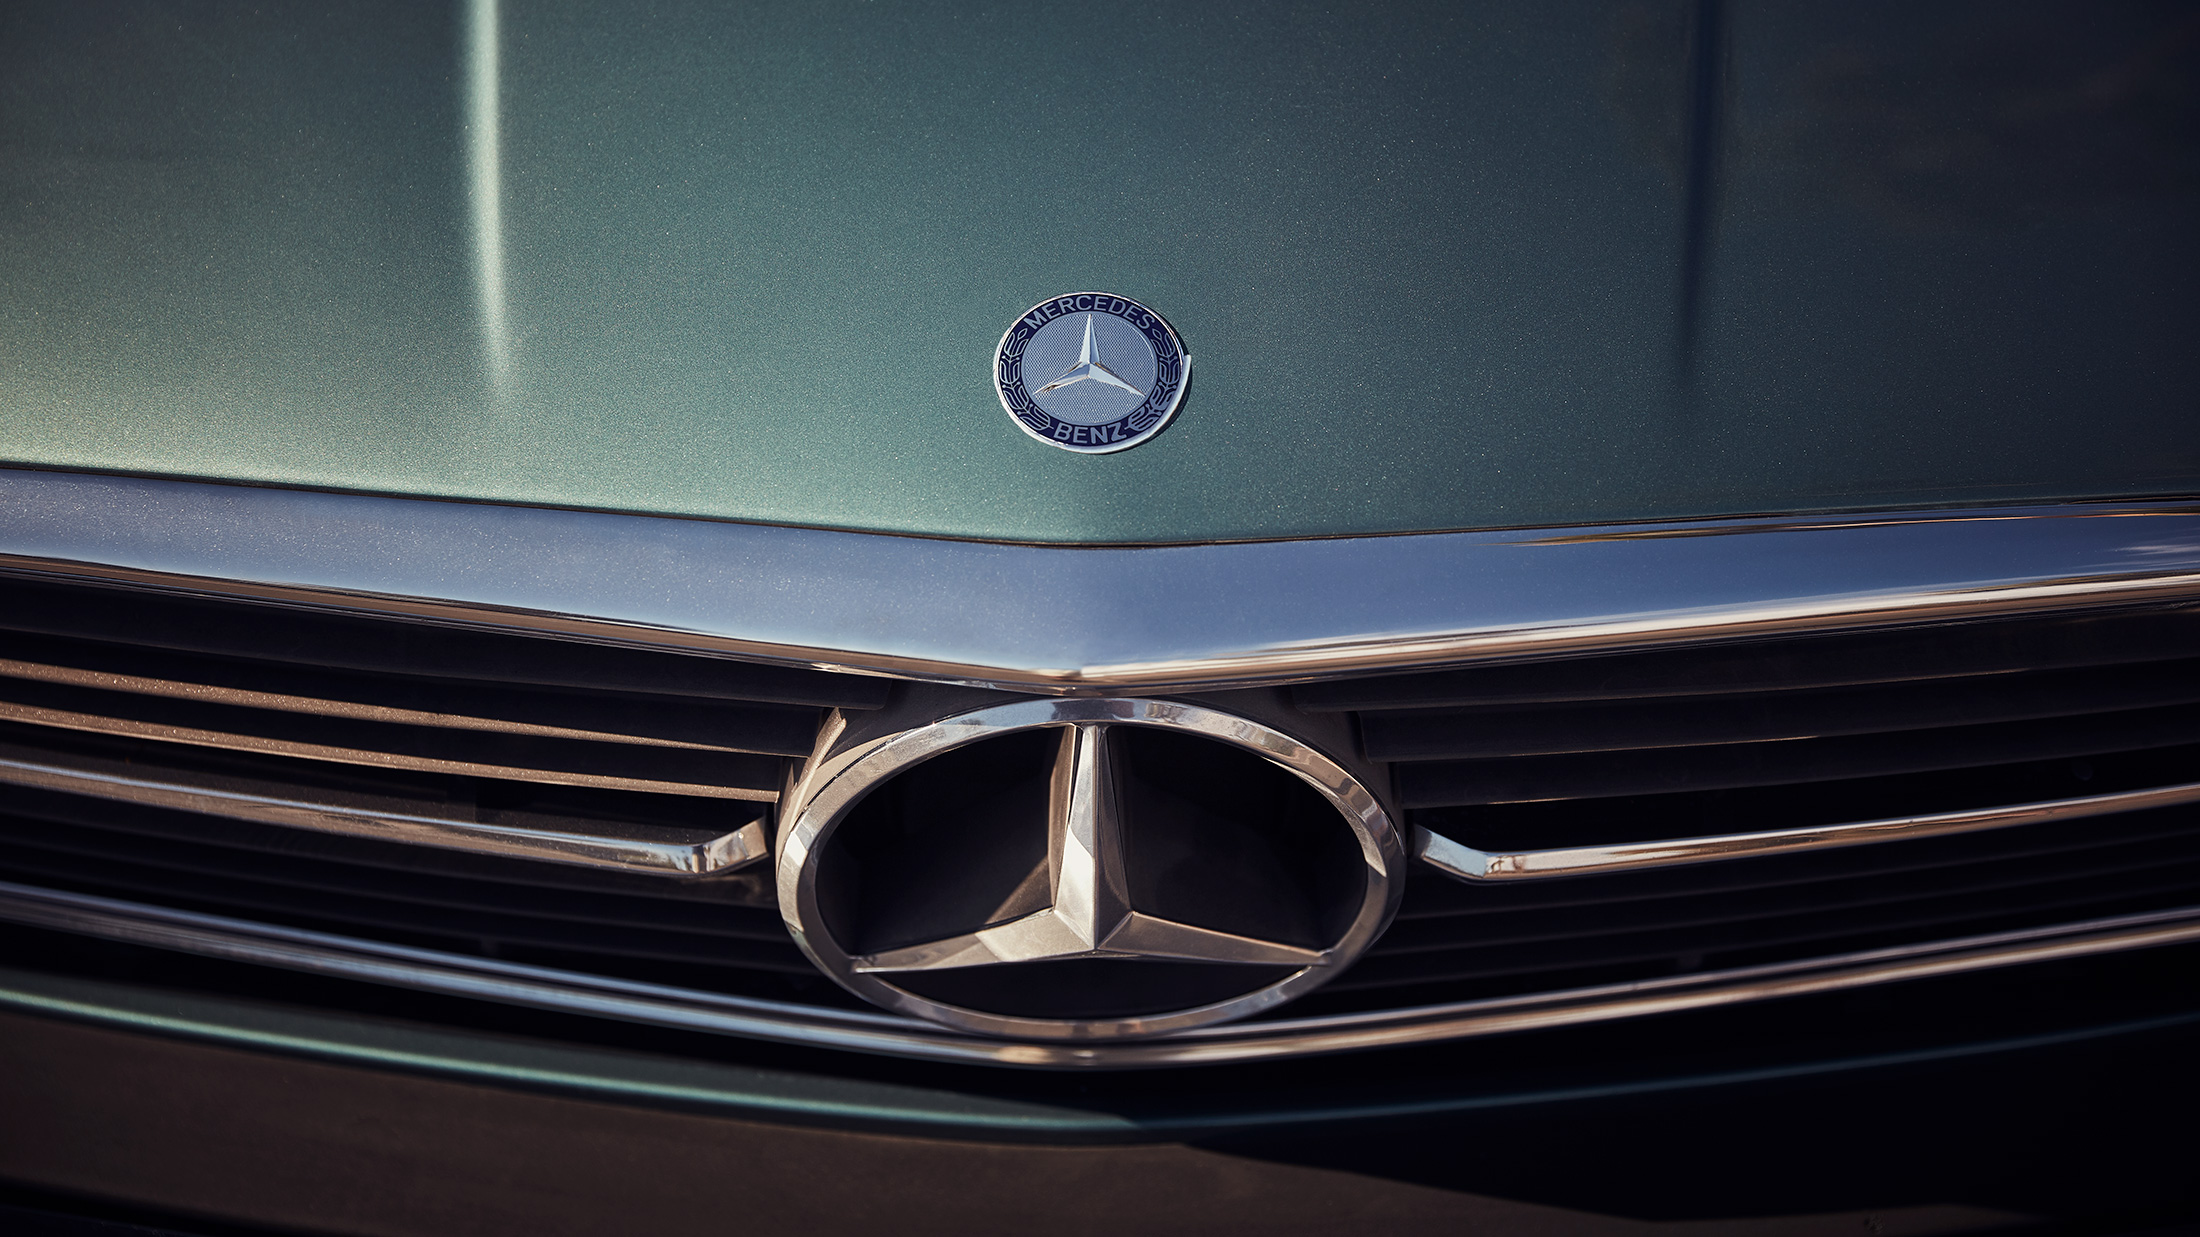 Mercedes 380 | Palm Springs | Aaron Cobb Commercial Photography